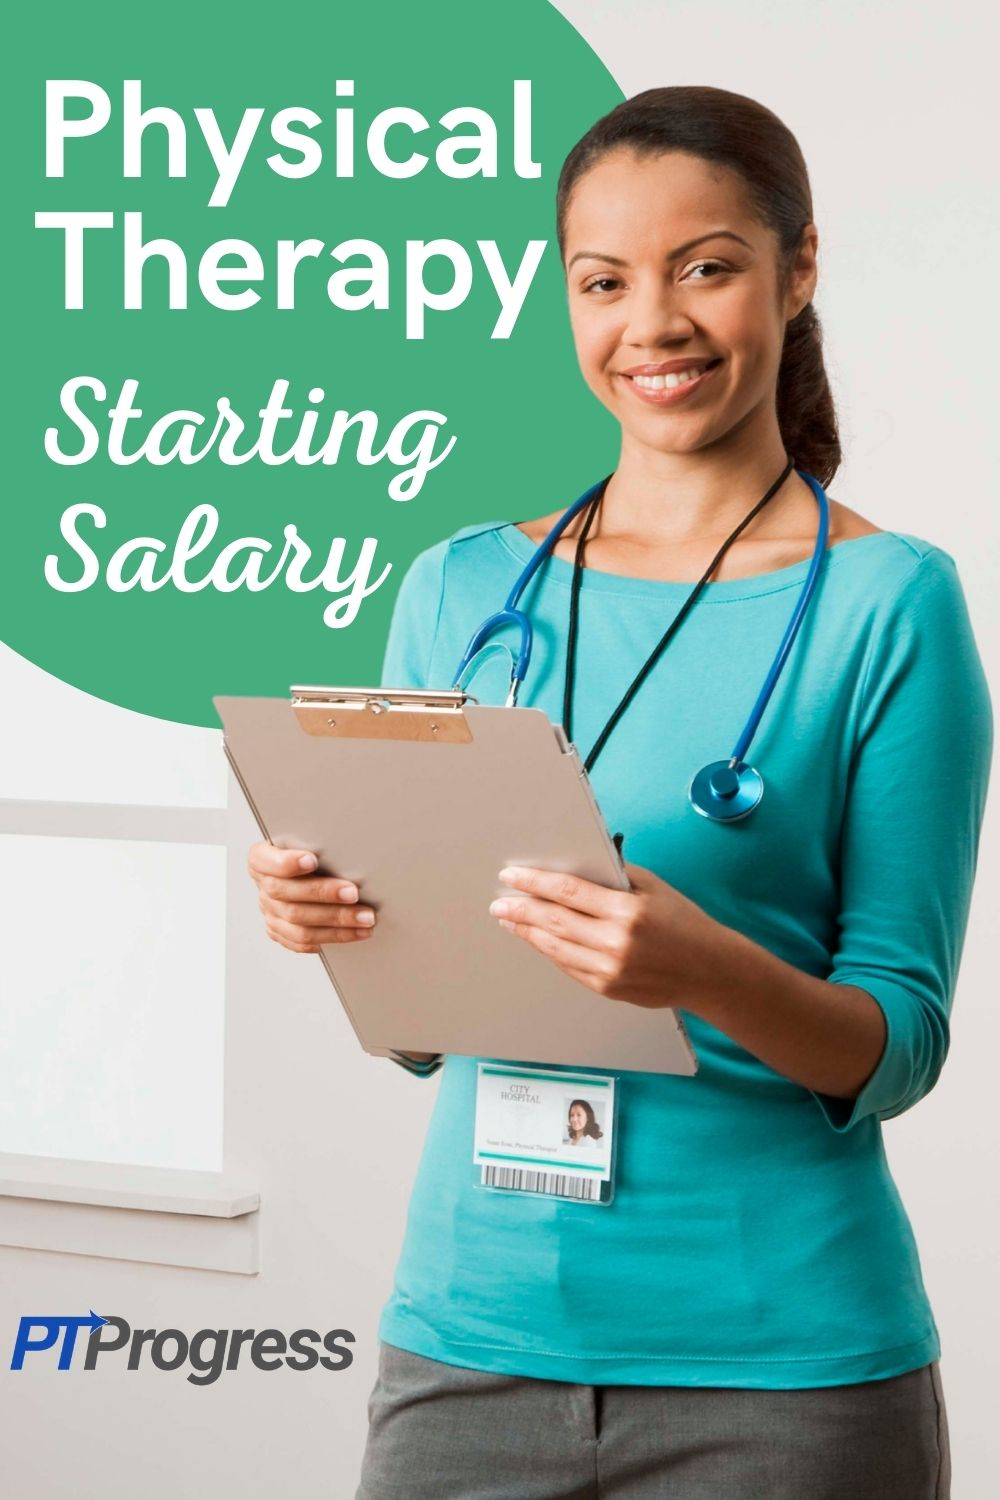 Physical Therapist Starting Salary Expectations For New PT Grads